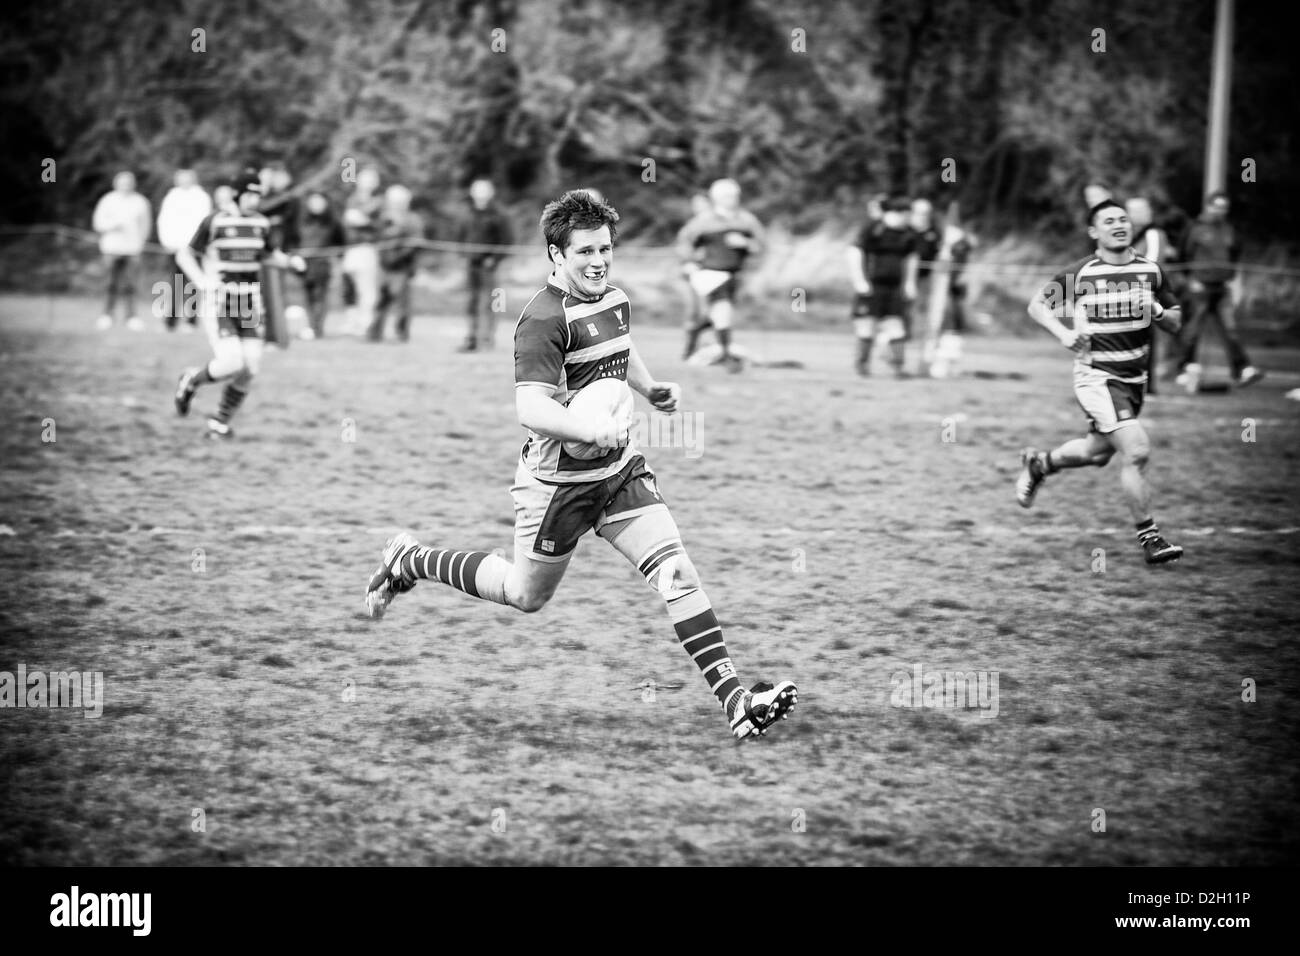 Rugby player running with the ball. Stock Photo